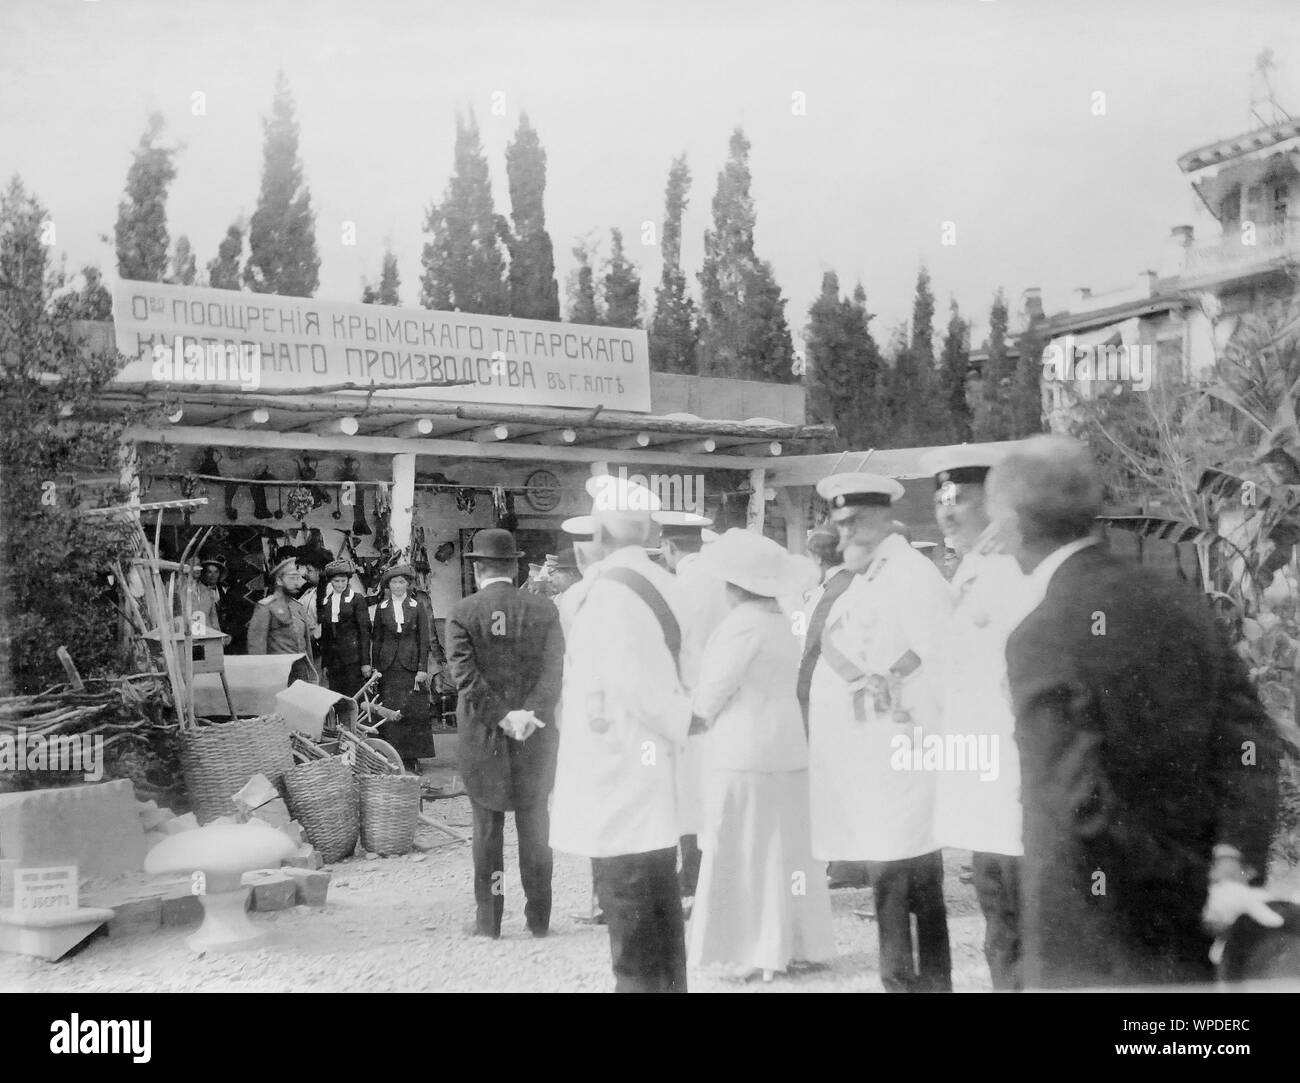 Russian Emperor Nicholas II with family in Yalta, Crimea in the beginning of 20th century. Emperor Nicholas II observing the Society for the Promotion of Crimean Tatar Handicraft Production in Yalta. Stock Photo